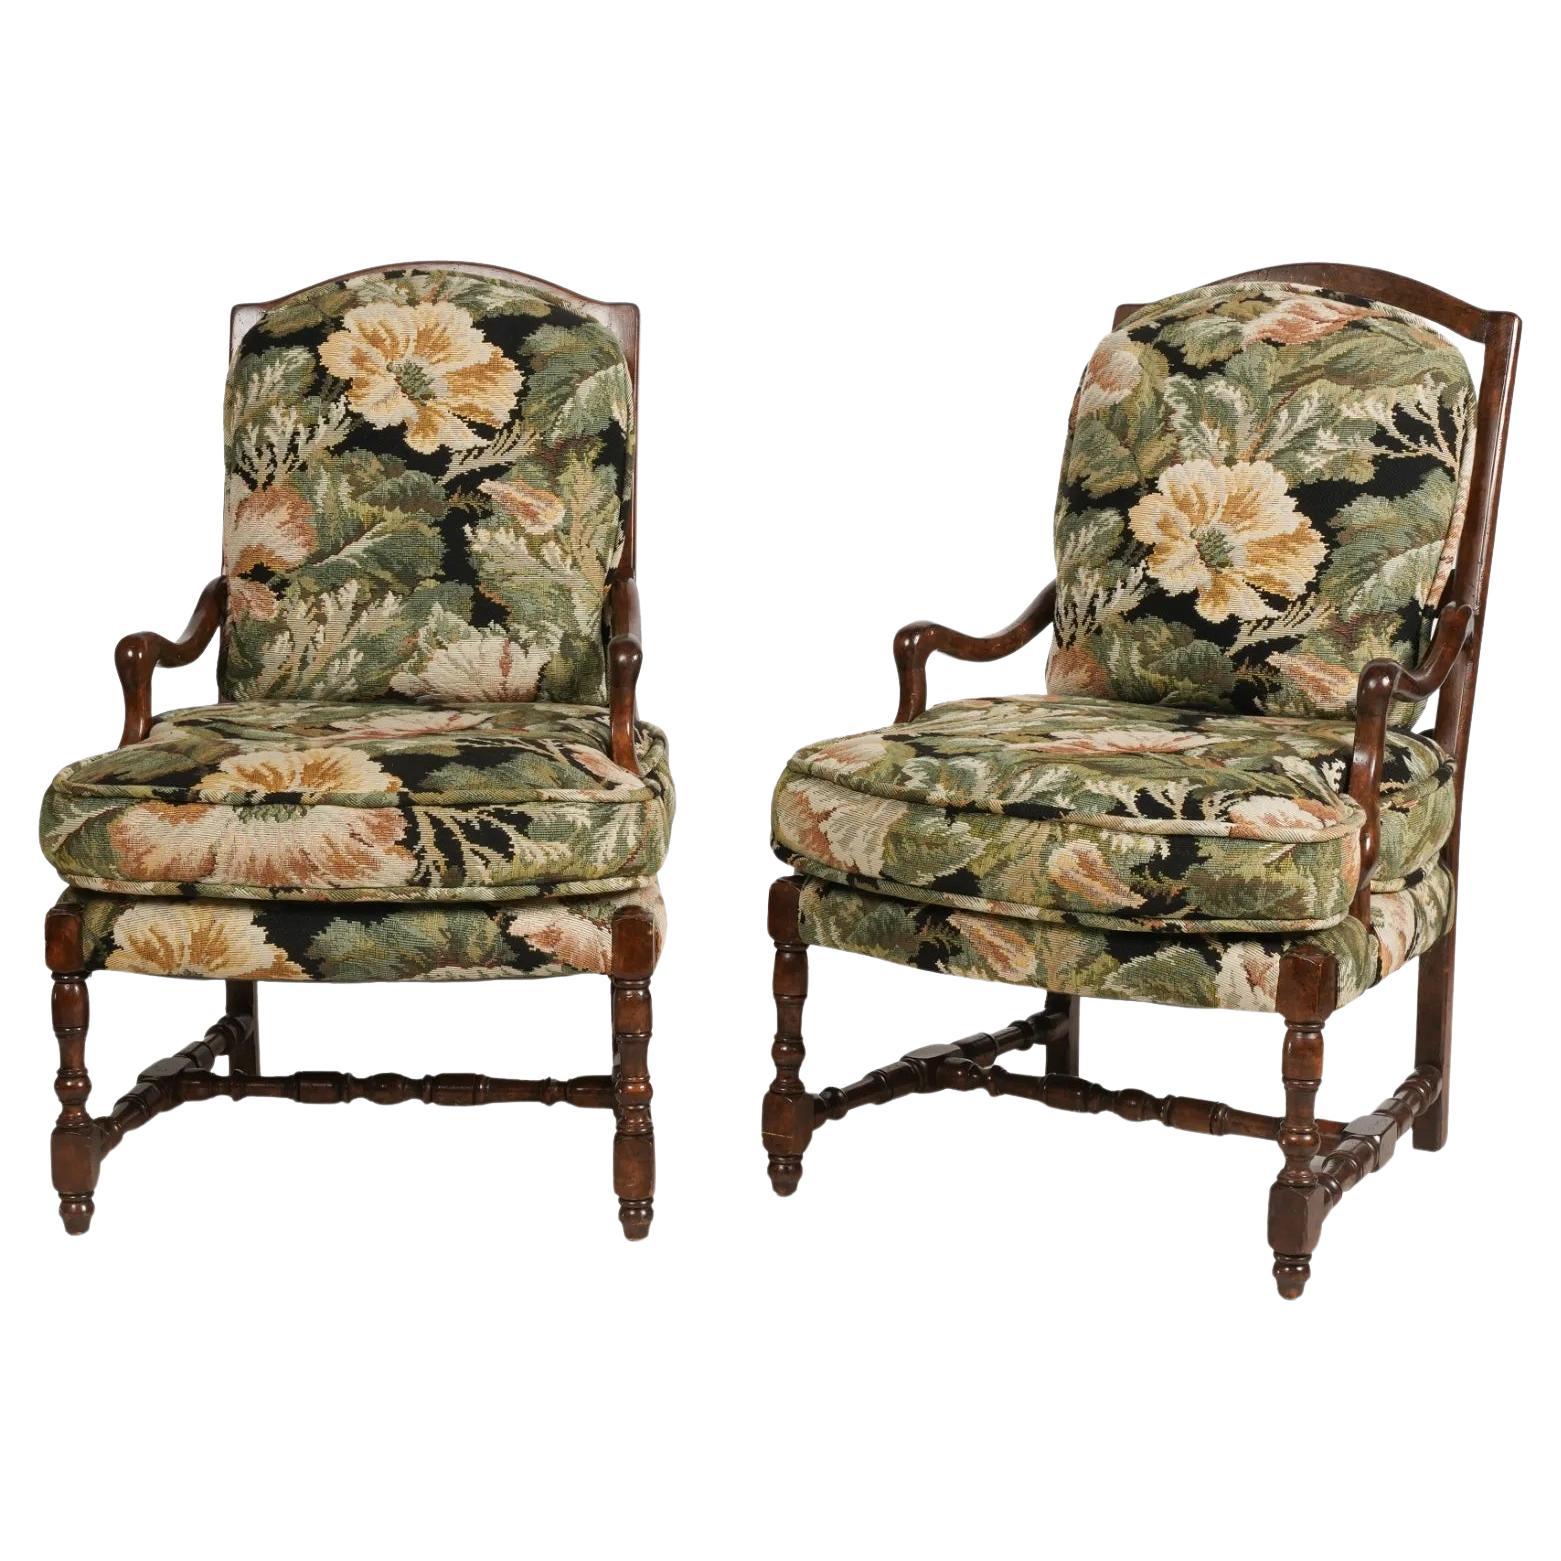 Pair of French Provincial Fruitwood Upholstered Arm Chairs Late 20th Century